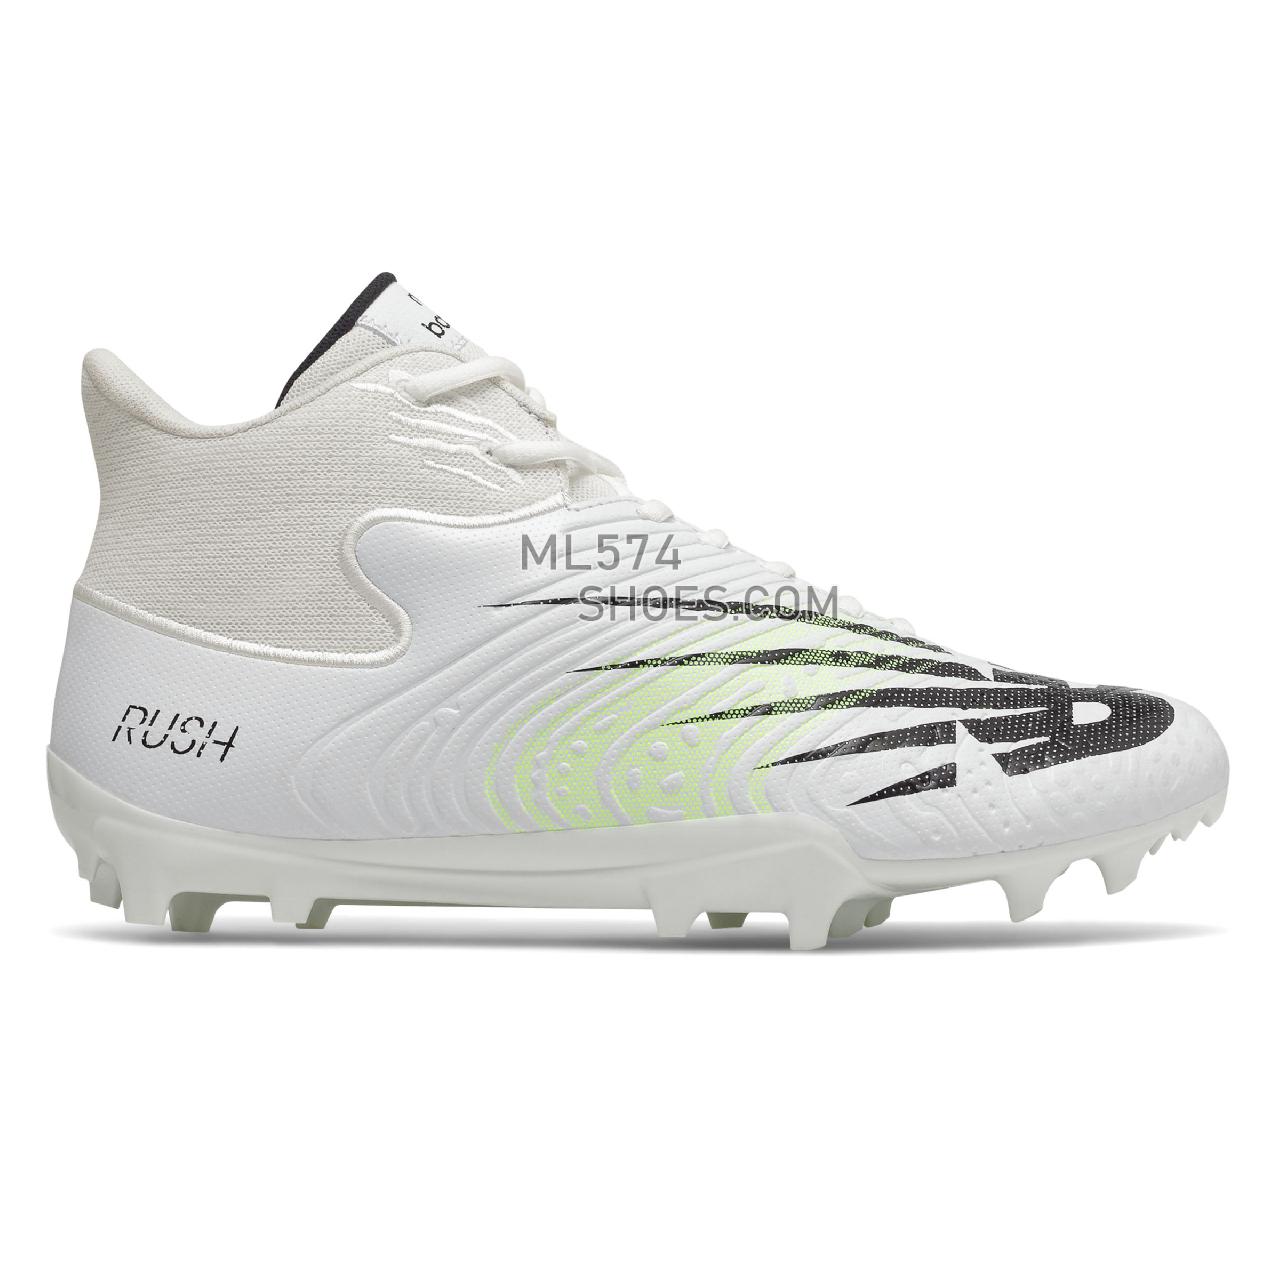 New Balance RushV3 Mid - Men's Turf And Lacrosse Cleats - White with Bleached Lime Glo - RUSHMW3